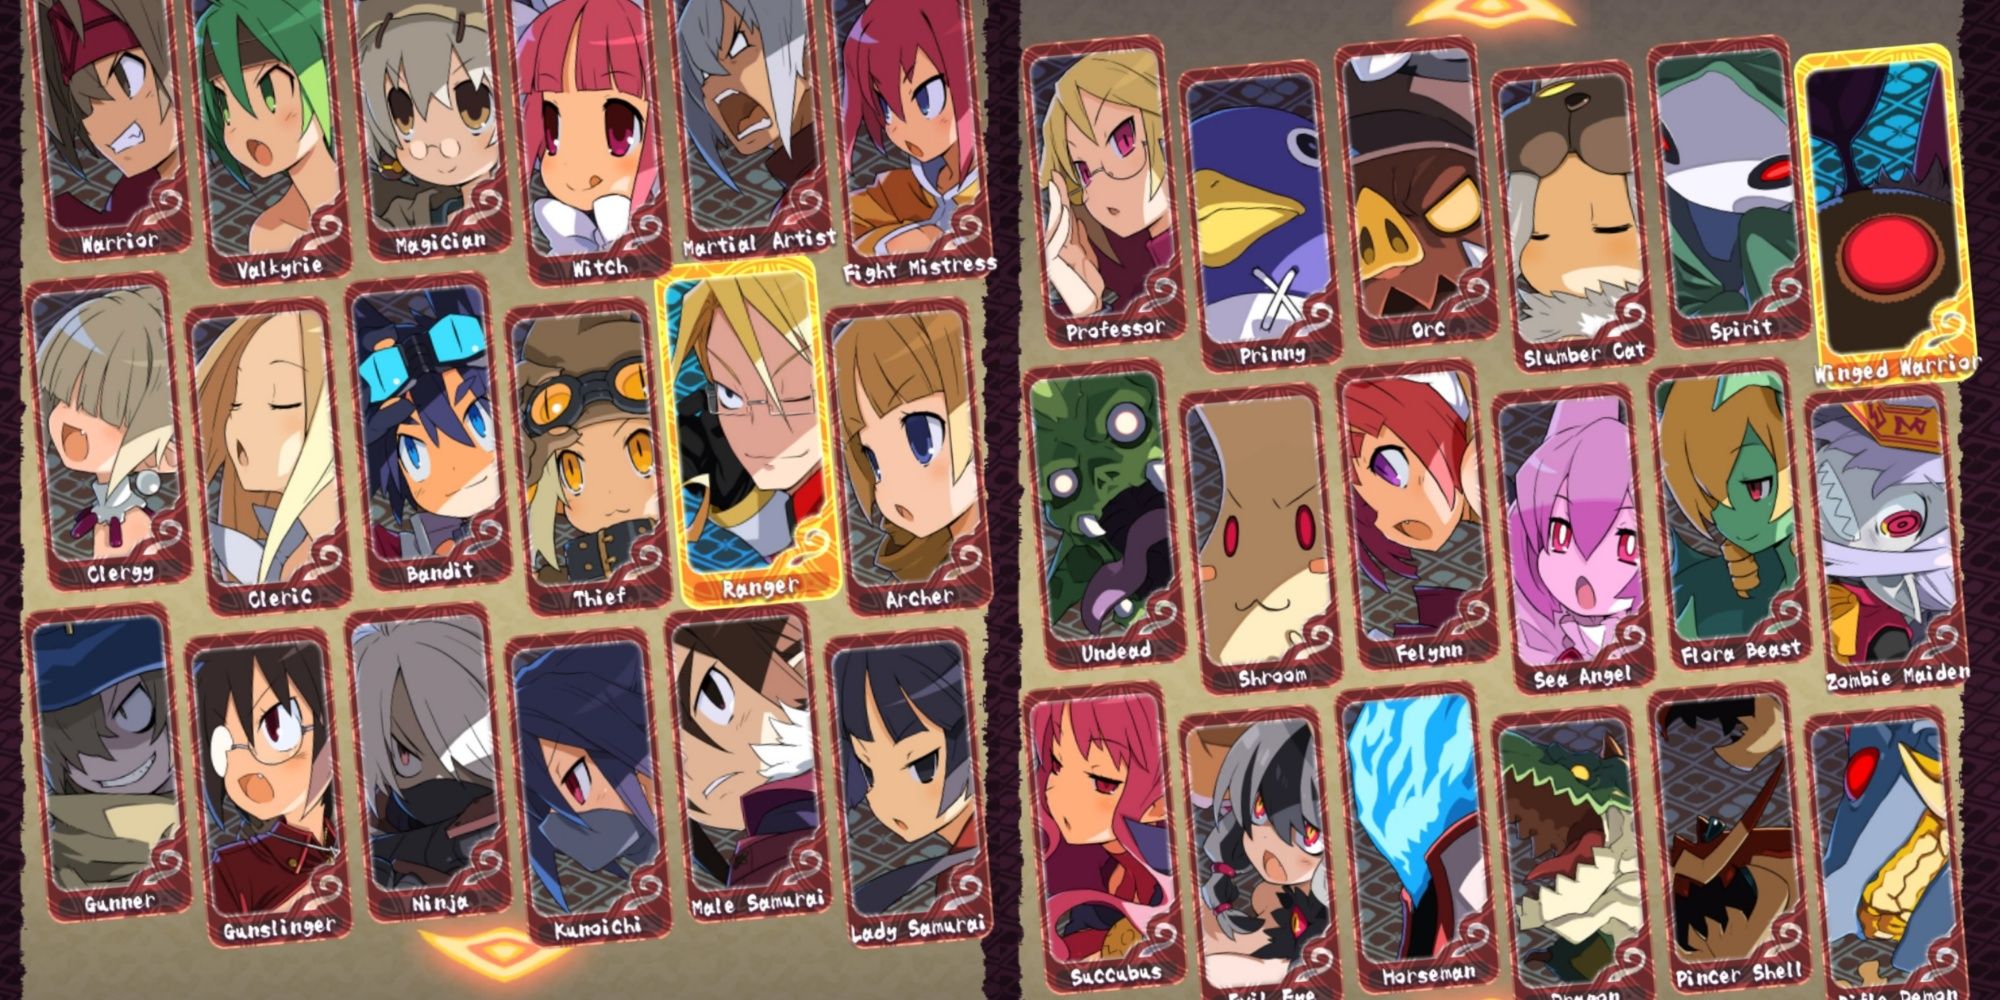 A large collection of classes from the recruitment menu in Disgaea 7